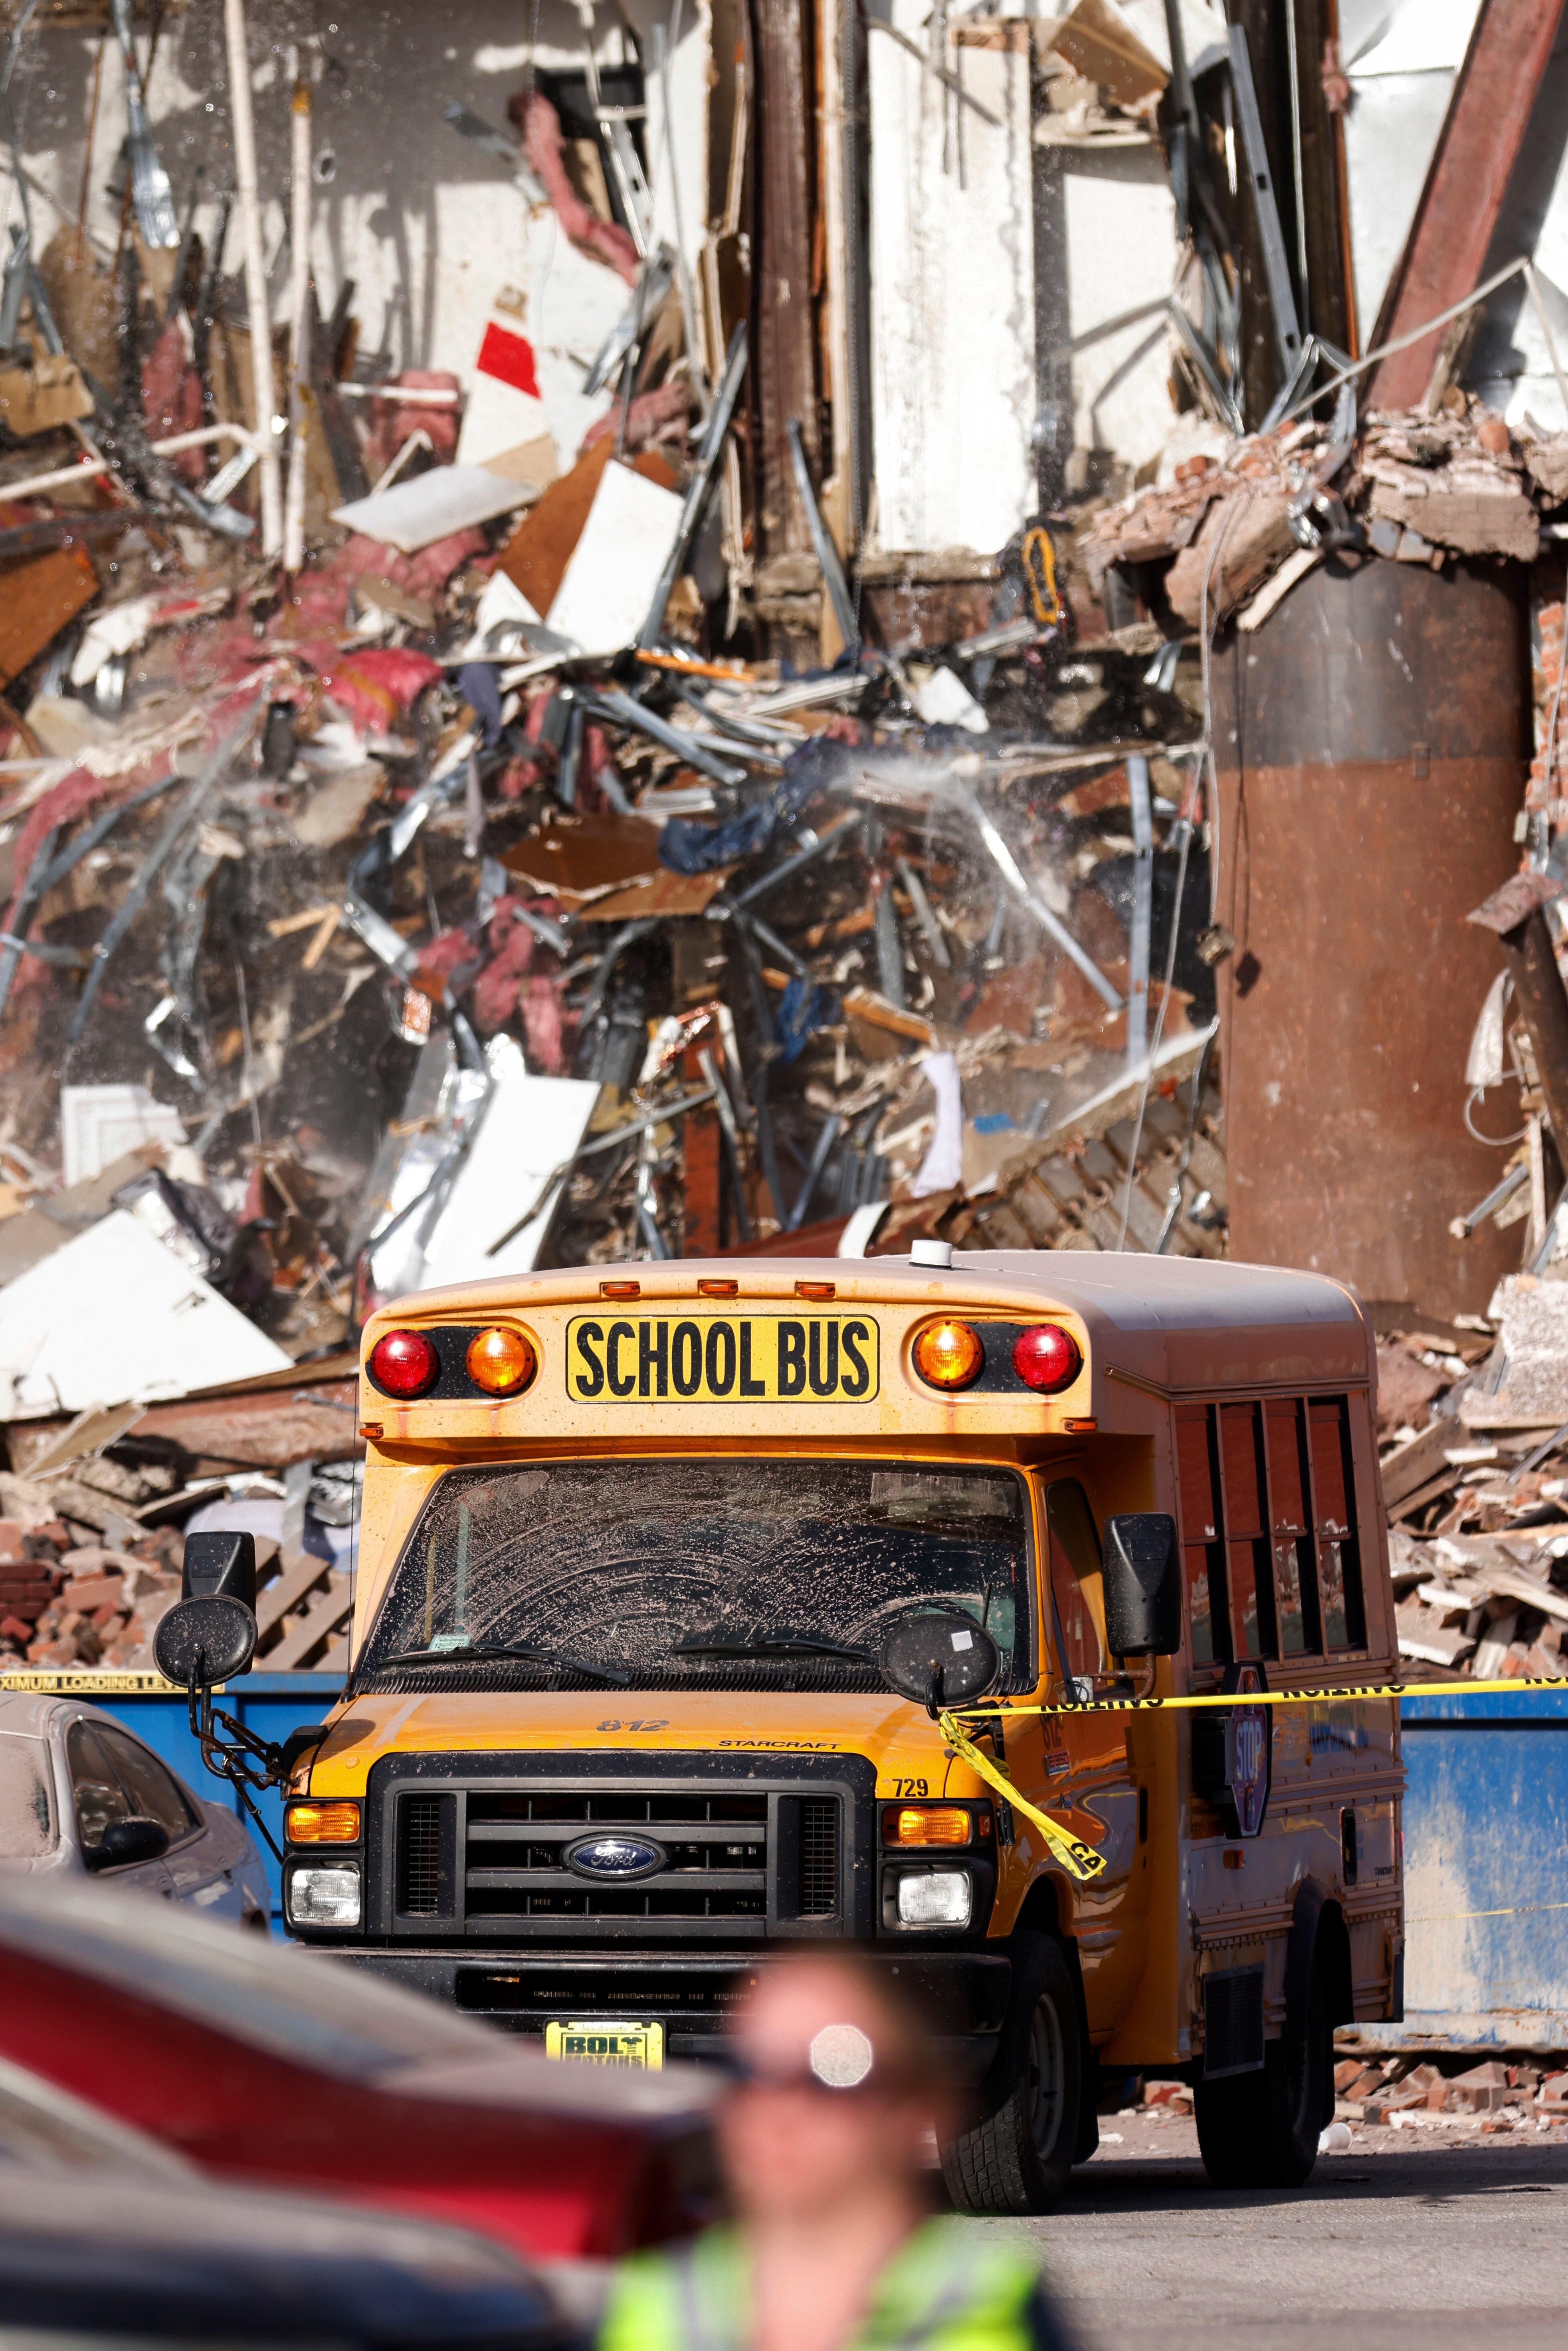 A school bus drives past the wreckage after the building collapse on Sunday